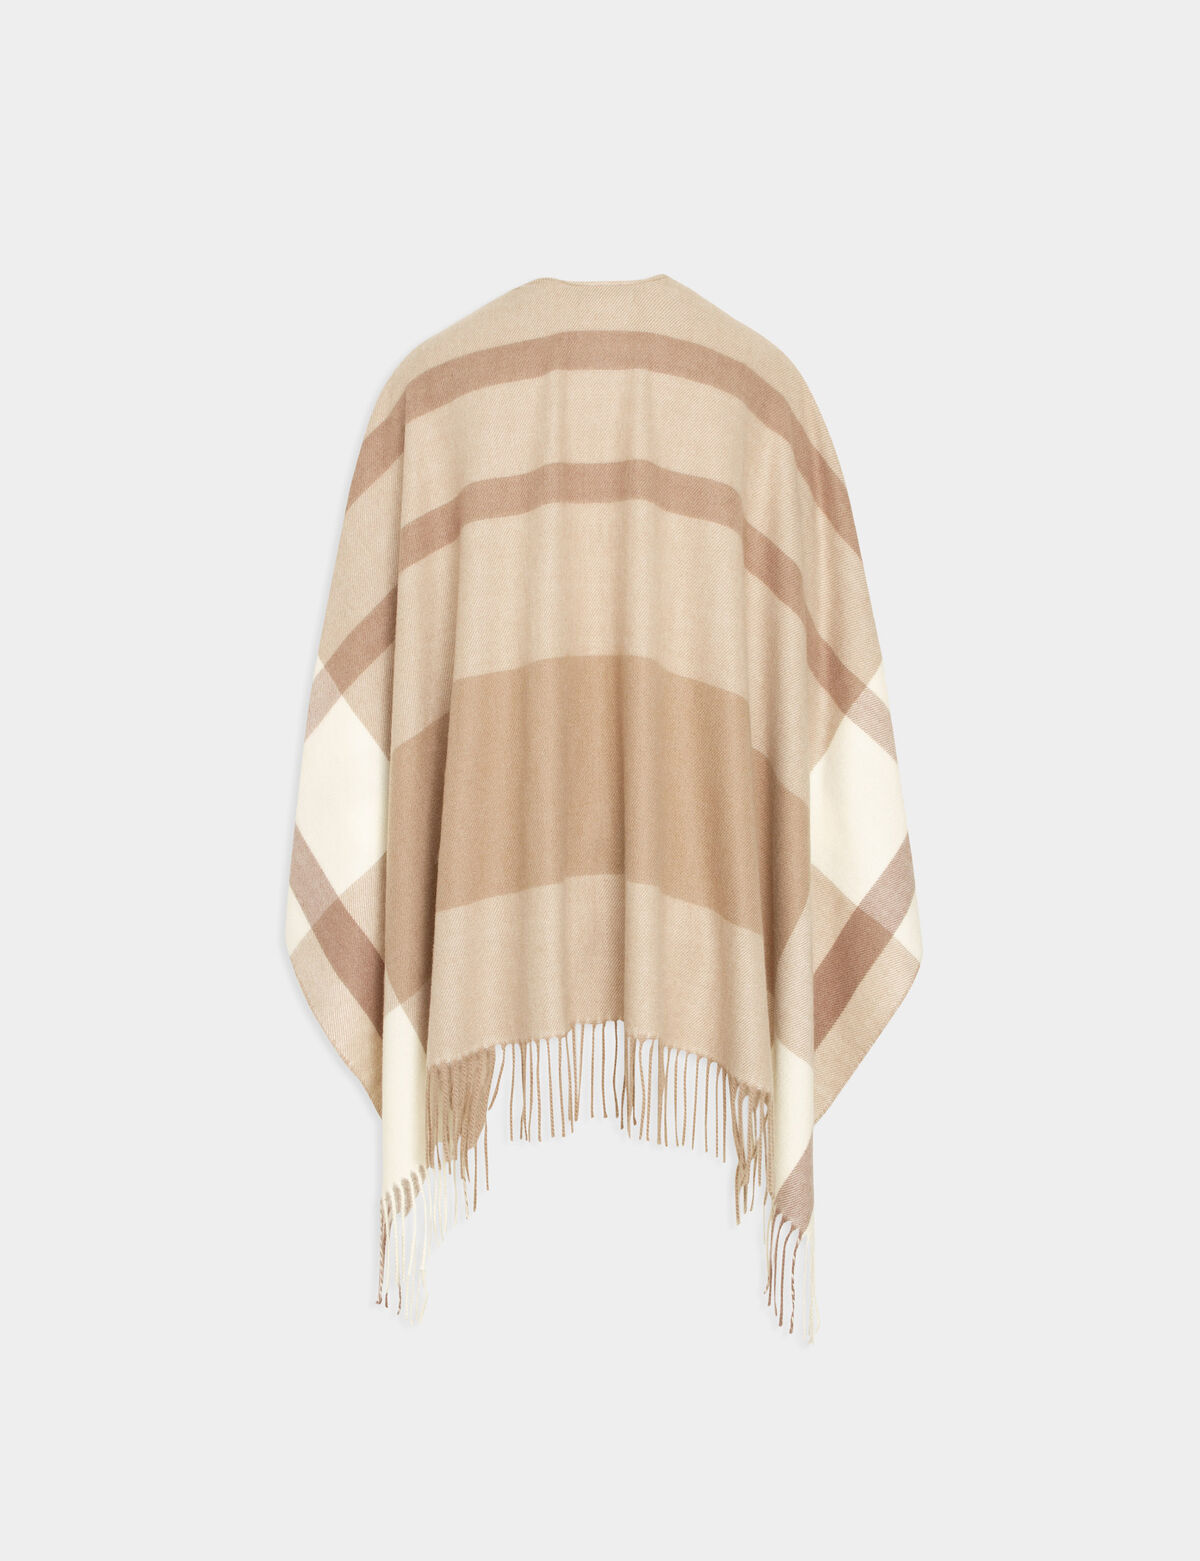 Poncho con rayas beige mujer 232-5Pclana